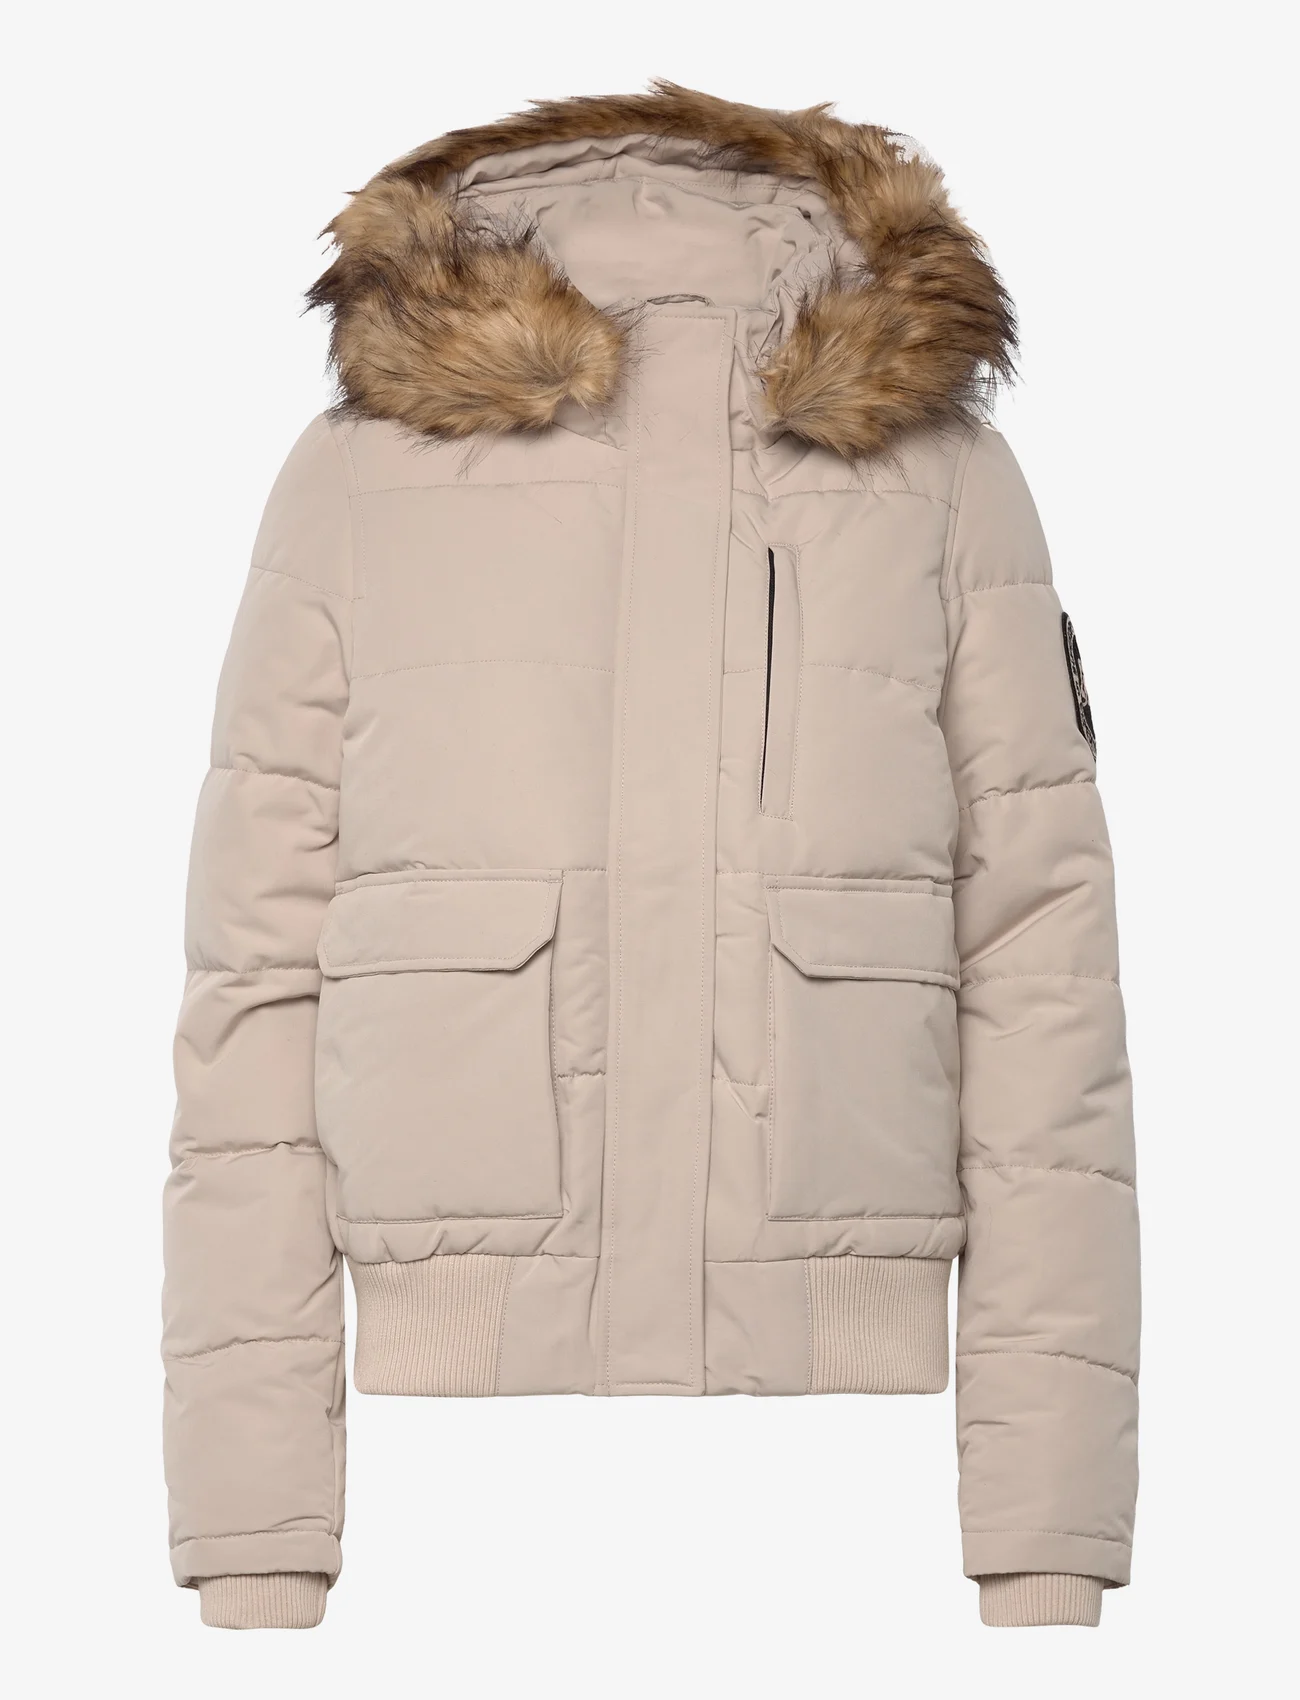 Superdry - EVEREST HOODED PUFFER BOMBER - kevättakit - chateau grey - 0